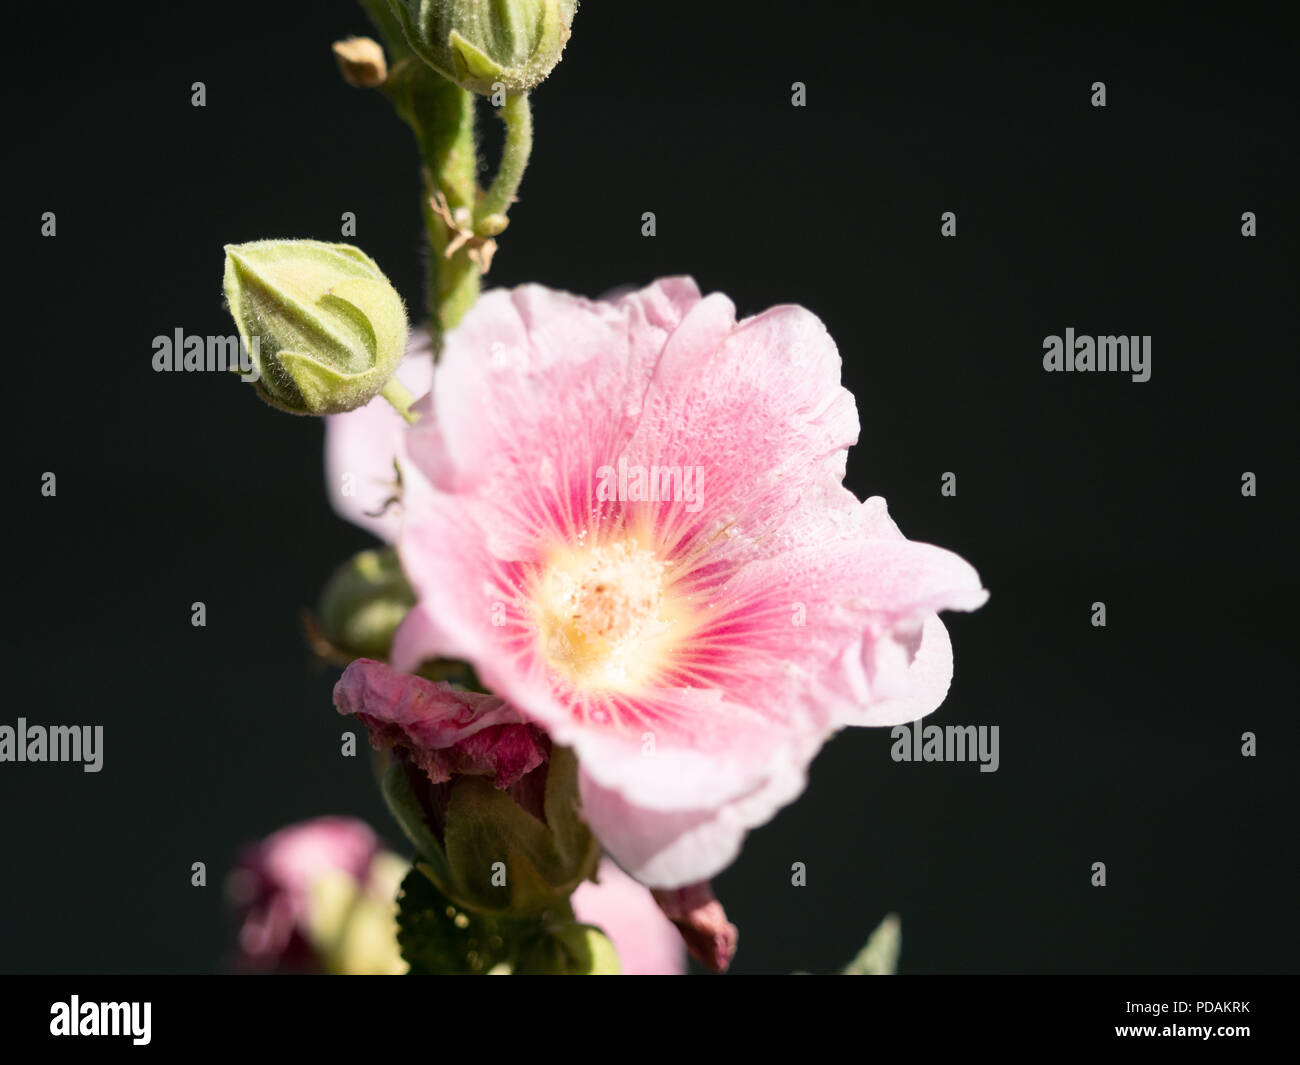 Close up of a pale pink and fuchsia hollyhock flower against a black background. Image has copy space. Stock Photo